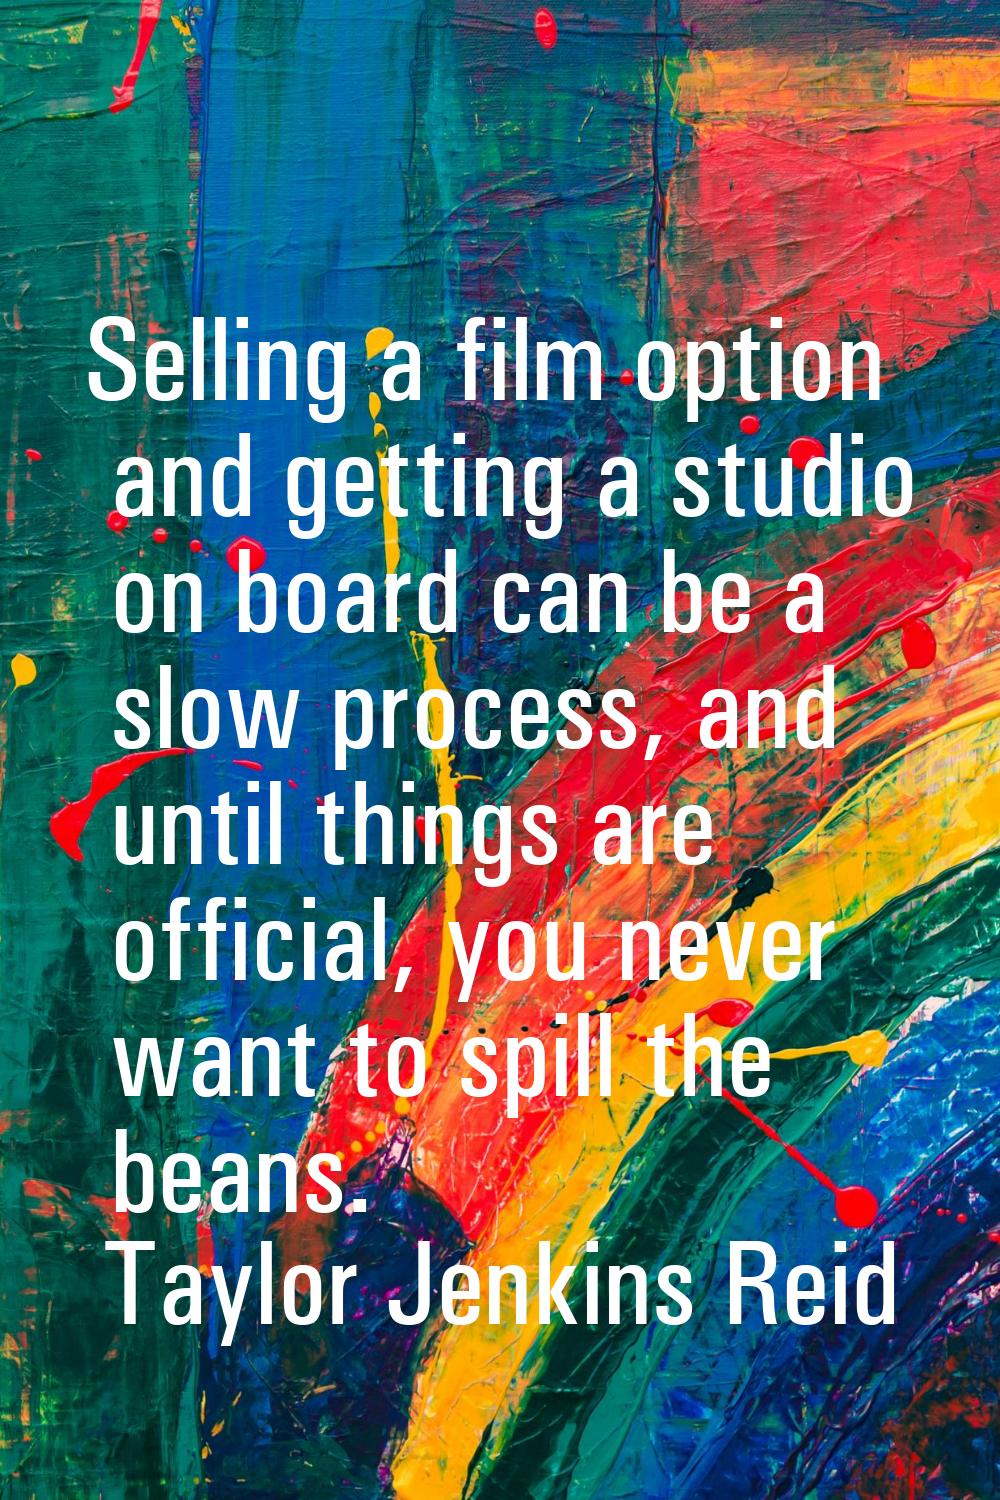 Selling a film option and getting a studio on board can be a slow process, and until things are off